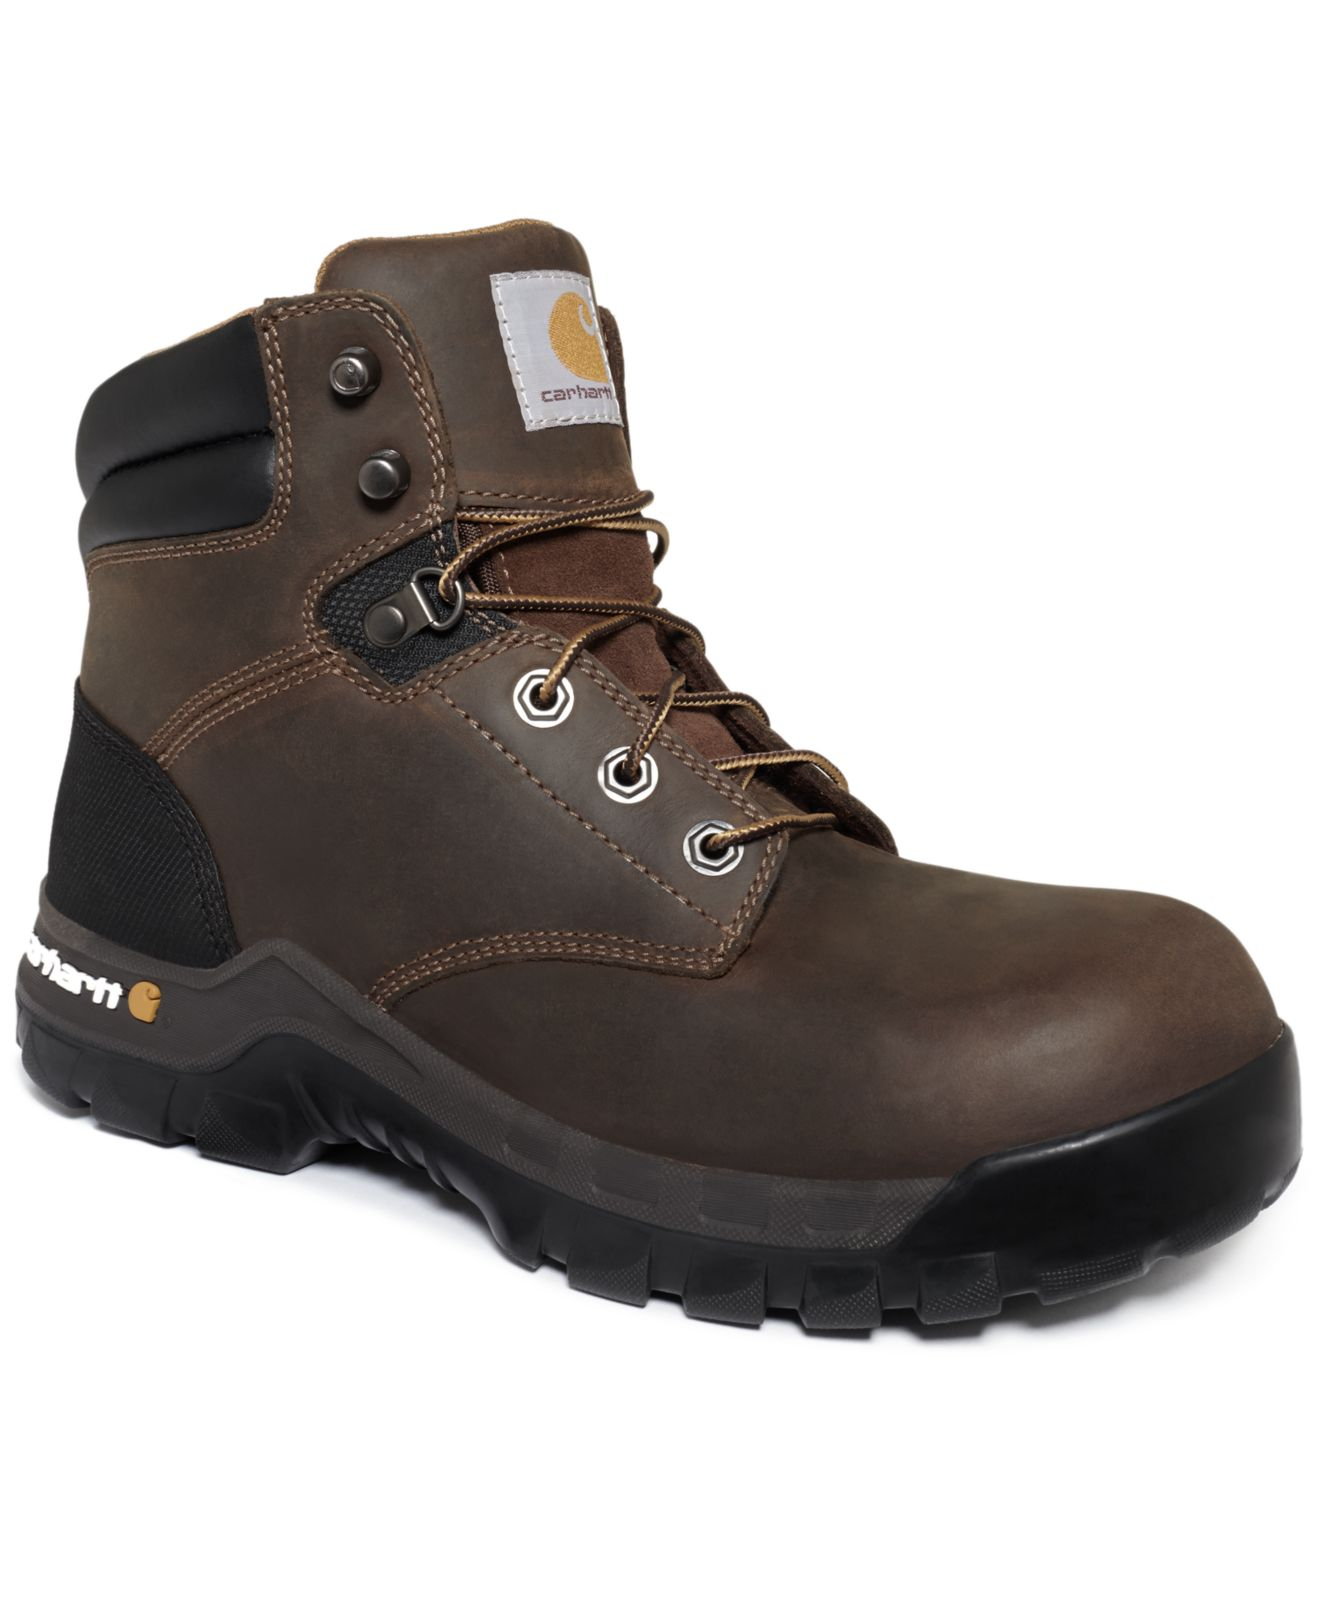 Lyst - Carhartt 6 Inch Composite Toe Rugged Flex Work Boots in Brown ...